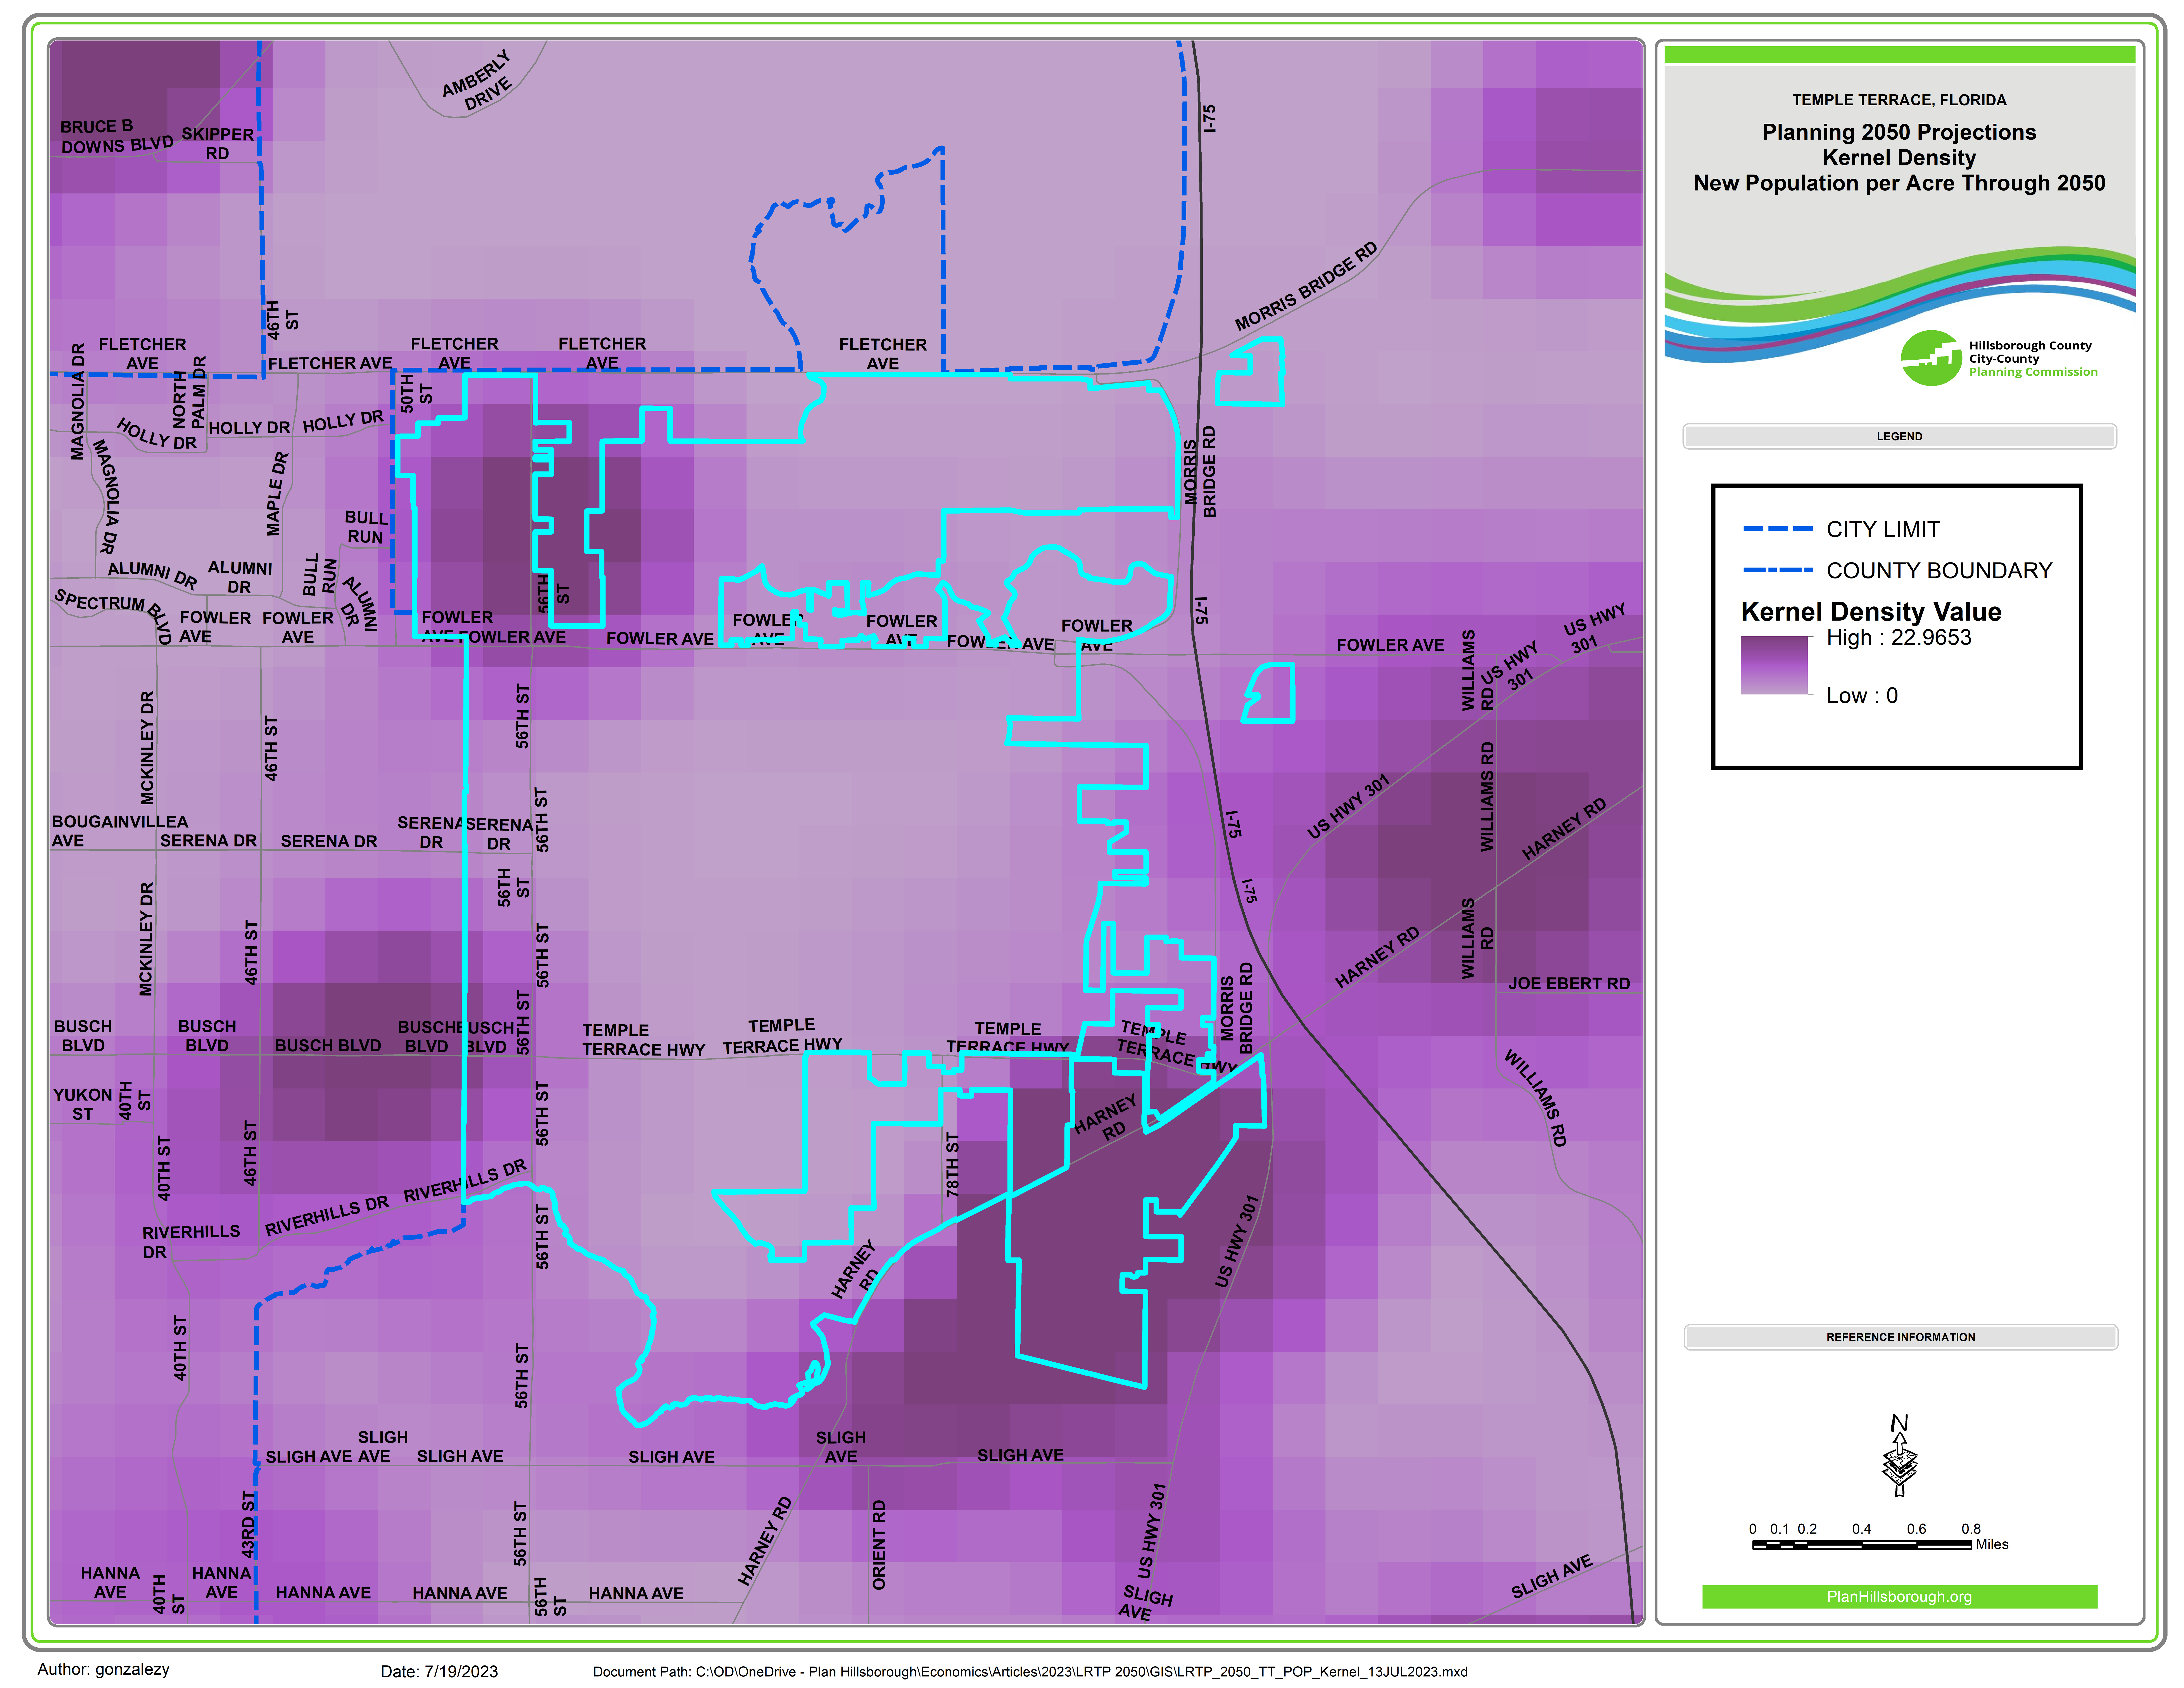 This map shows kernel density for new persons per acre through 2050 for the City of Temple Terrace. Most newcomers are expected to move to darker purple areas like 56th Street (between Fowler and Fletcher) and Harney Road.